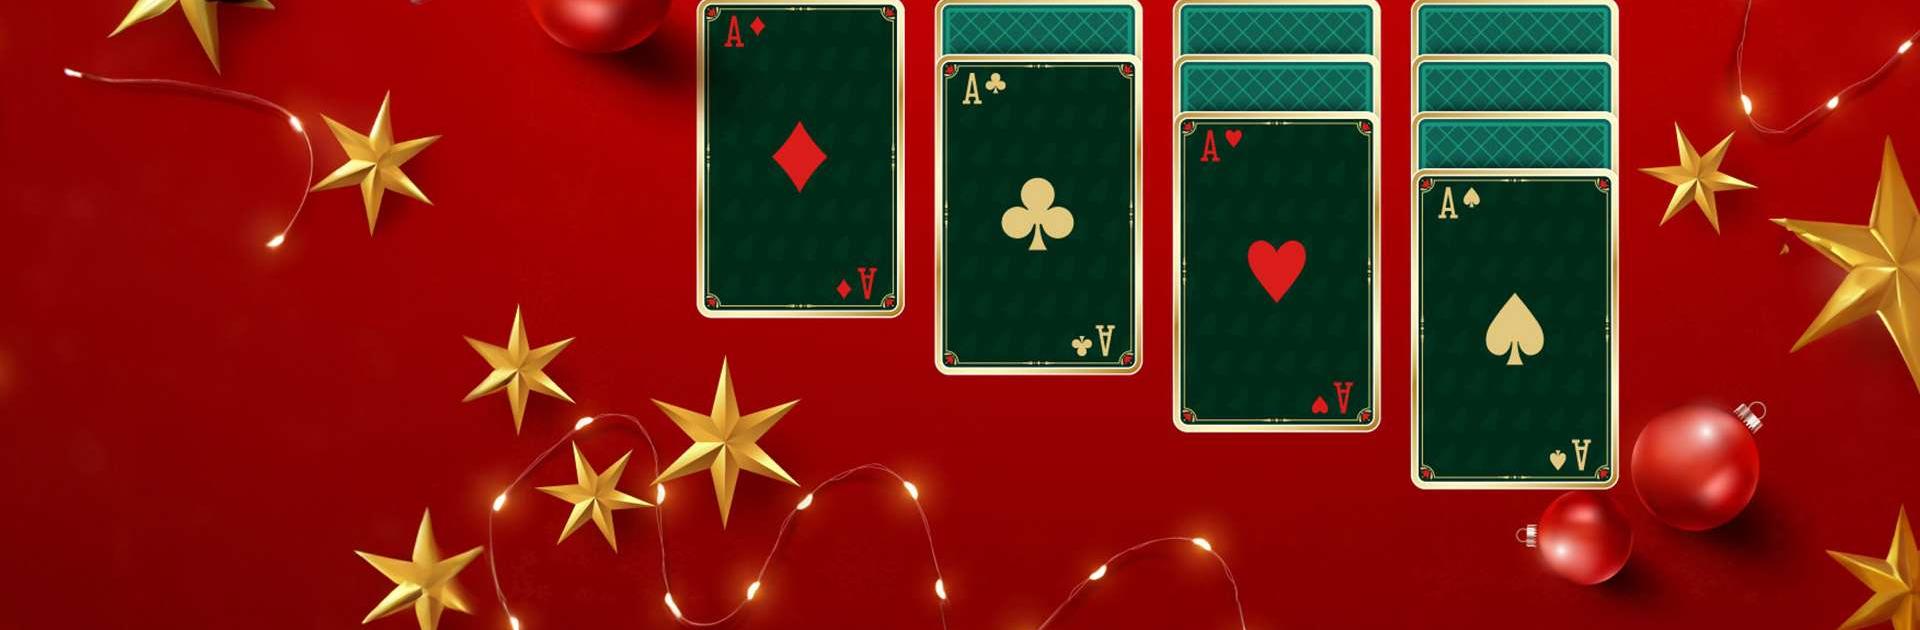 Play Christmas Time Solitaire Online